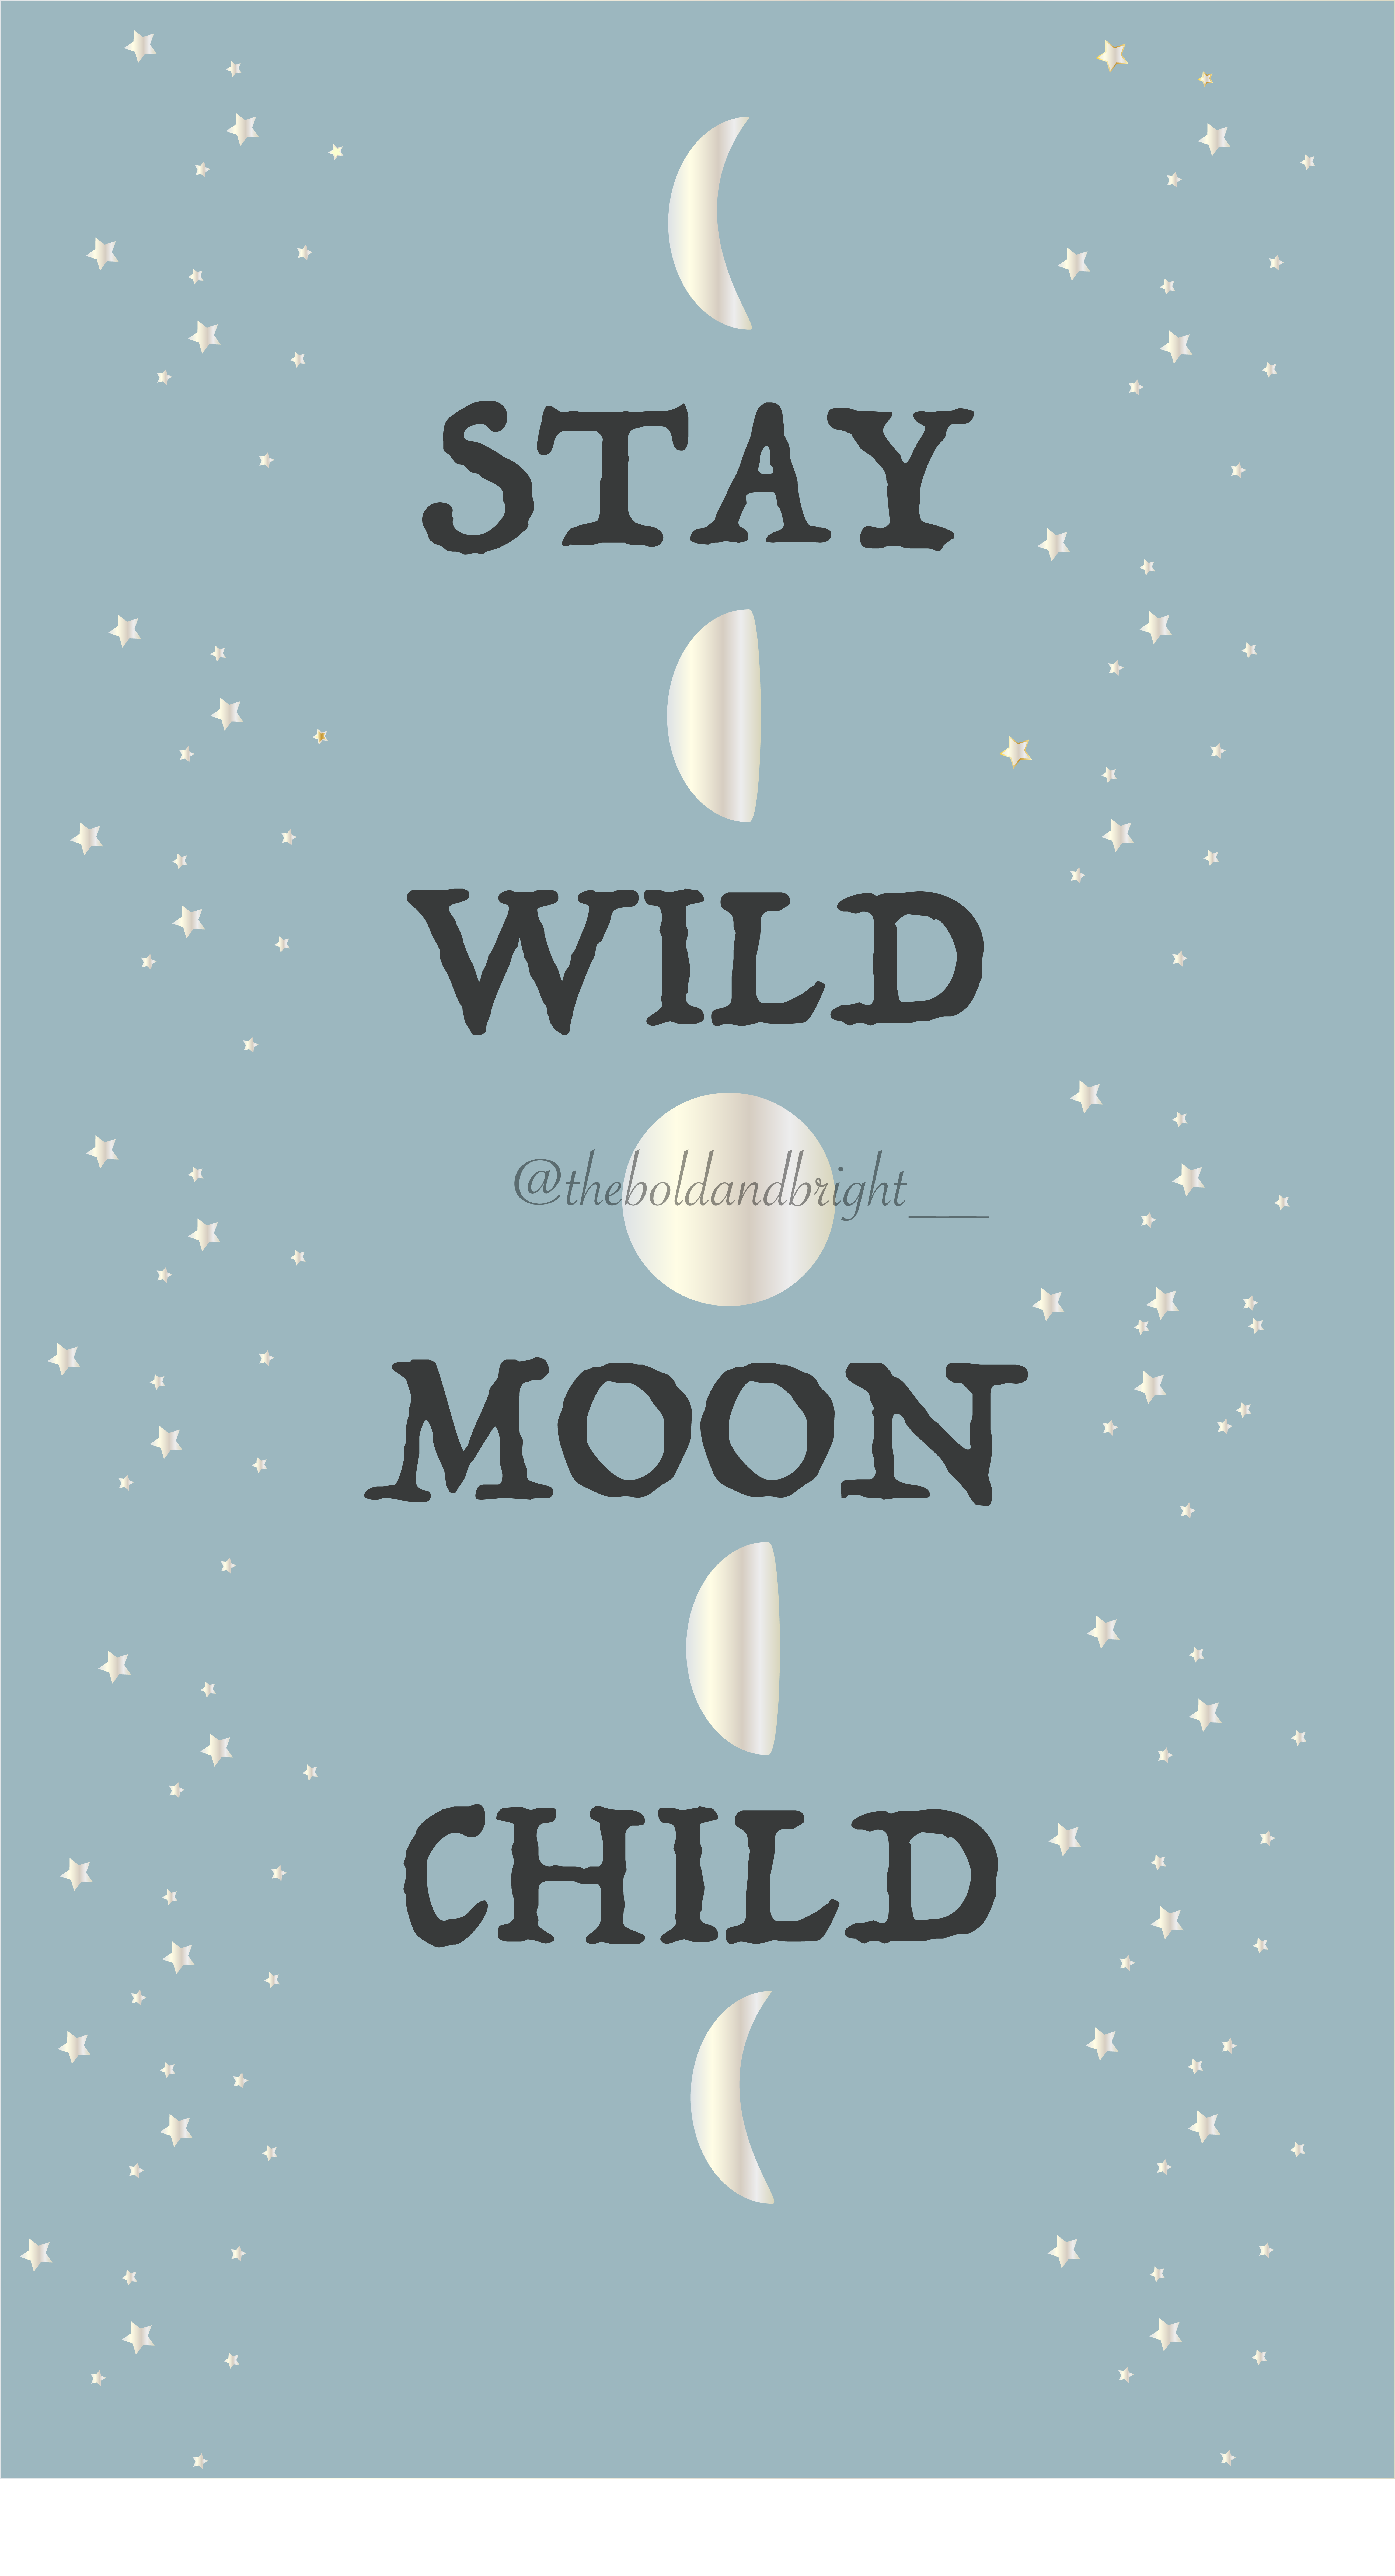 Quotes and Designs for Inspiration. Moon child, Moon quotes